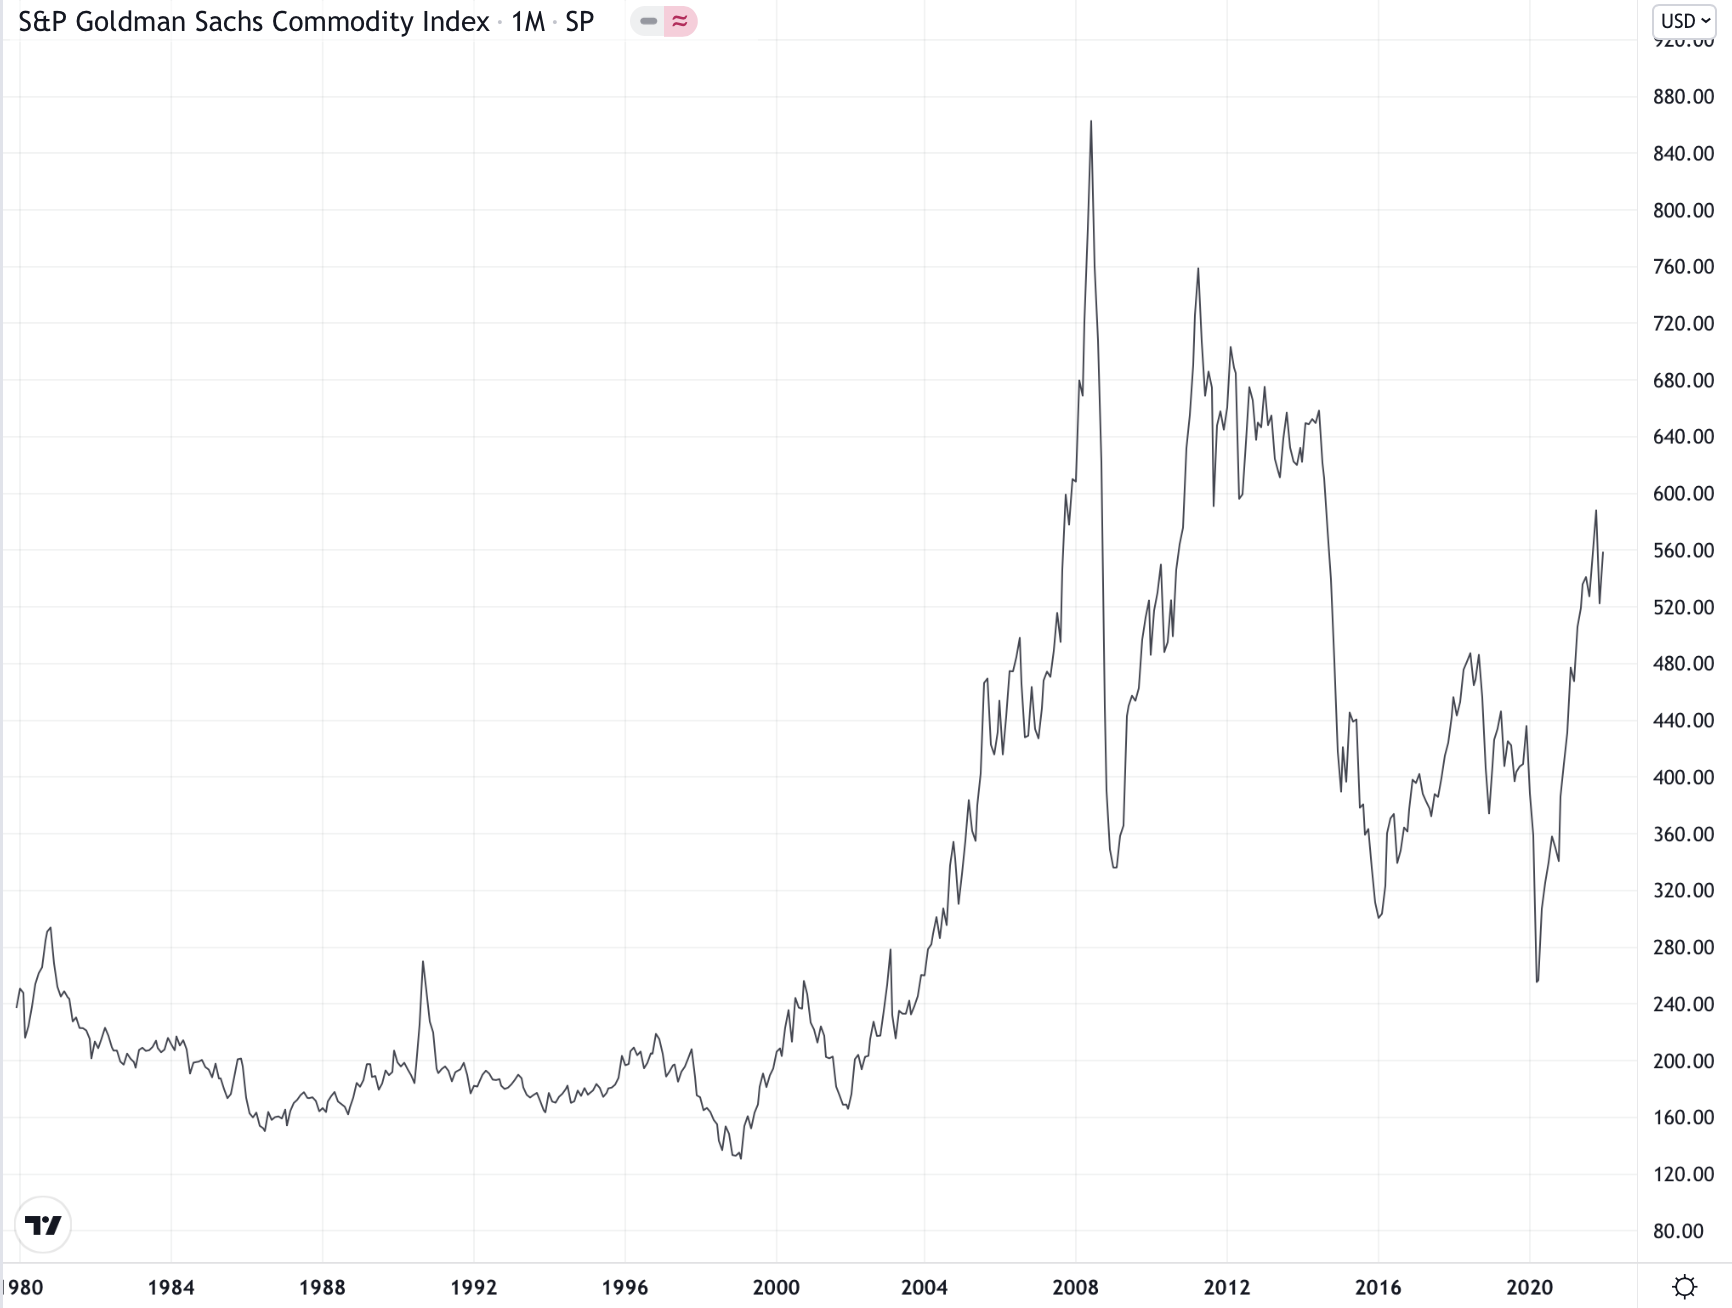 line chart showing two distinct eras in commodity pricing